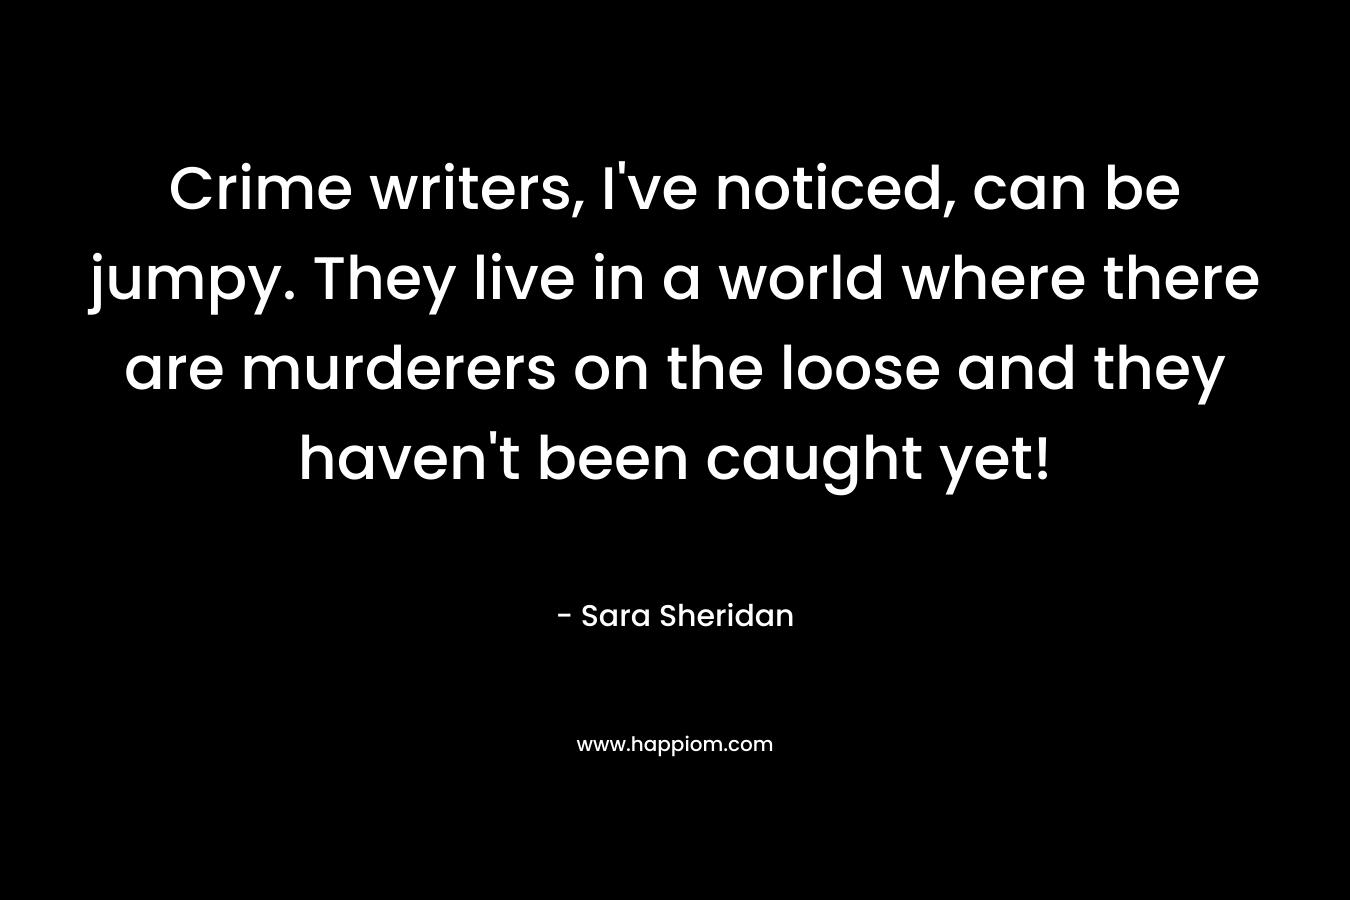 Crime writers, I’ve noticed, can be jumpy. They live in a world where there are murderers on the loose and they haven’t been caught yet! – Sara Sheridan